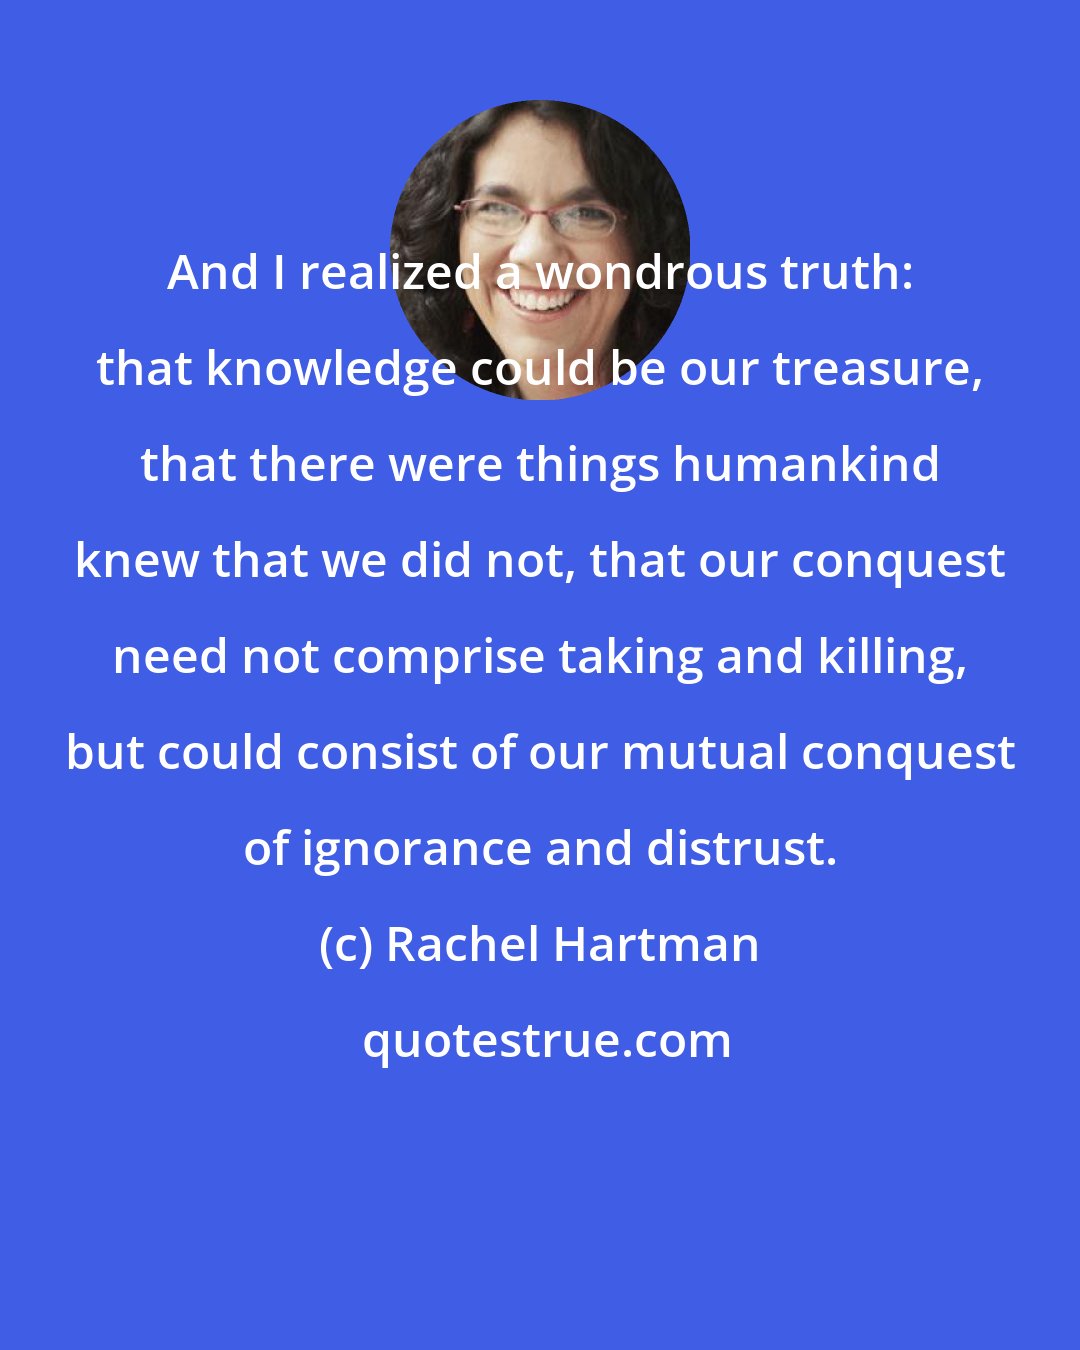 Rachel Hartman: And I realized a wondrous truth: that knowledge could be our treasure, that there were things humankind knew that we did not, that our conquest need not comprise taking and killing, but could consist of our mutual conquest of ignorance and distrust.